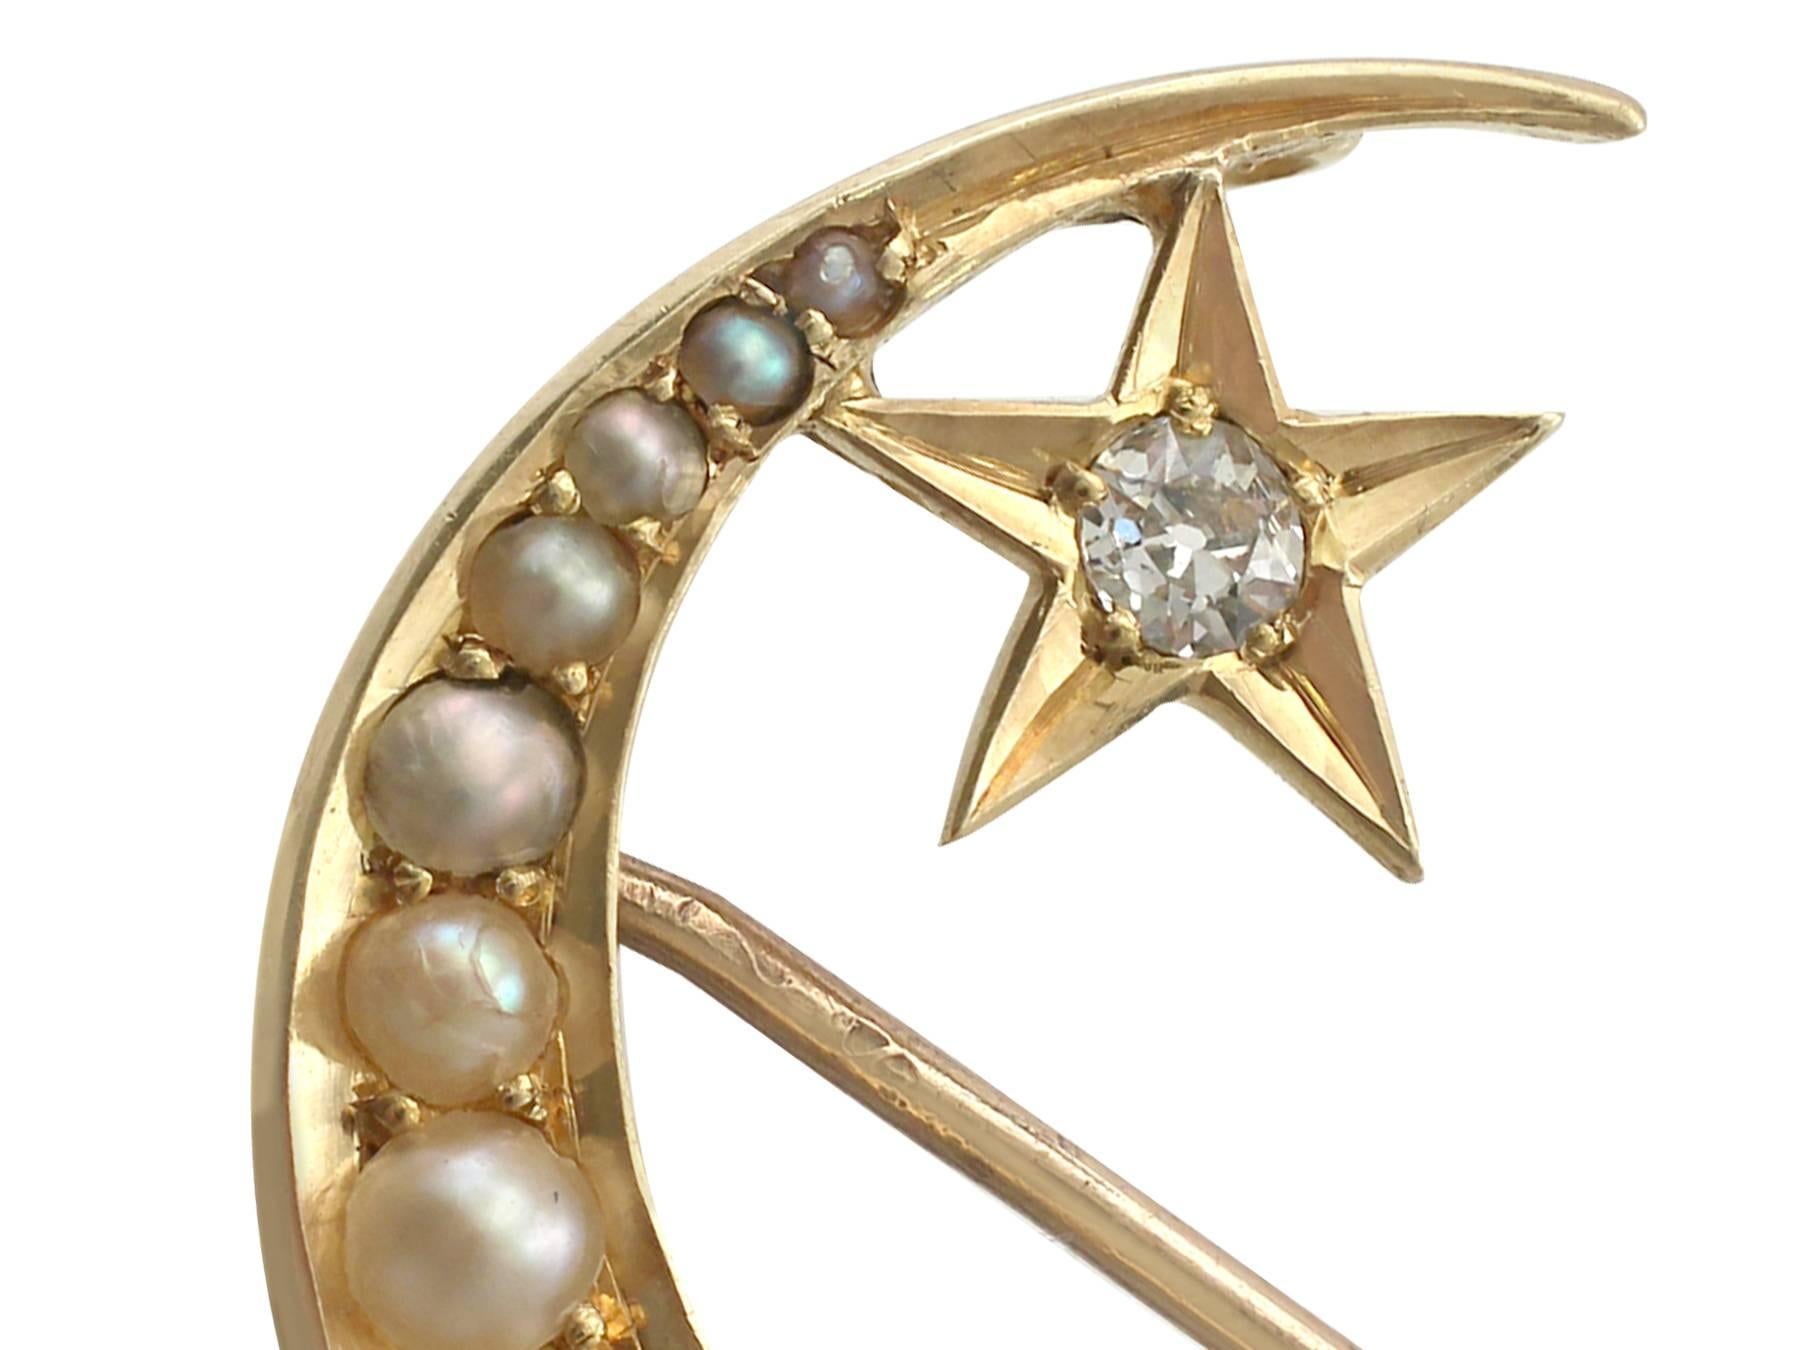 A fine and impressive 0.05 carat diamond, seed pearl and 15 carat yellow gold crescent and star brooch; part of our diverse antique jewellery and estate jewelry collections.

This fine and impressive crescent brooch has been crafted in 15 ct yellow